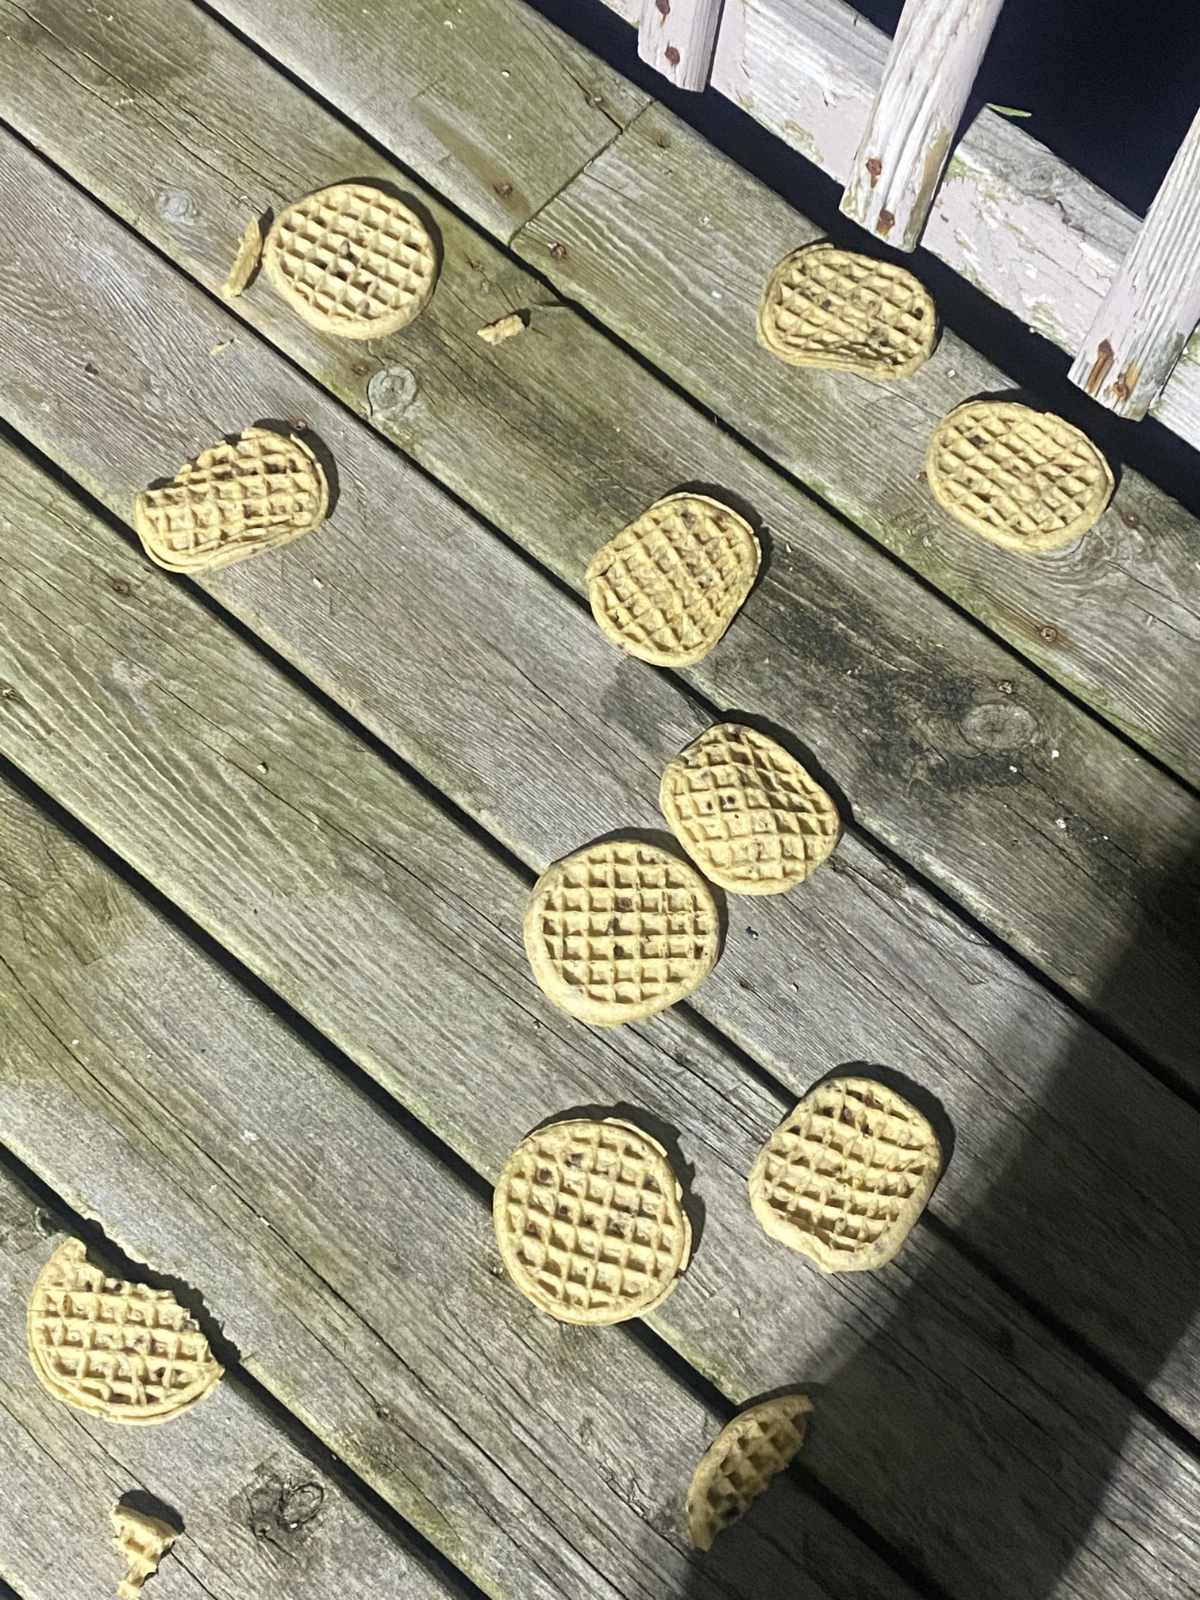 My mom threw all the chocolate waffles outside for the birds thinking the chocolate was mold